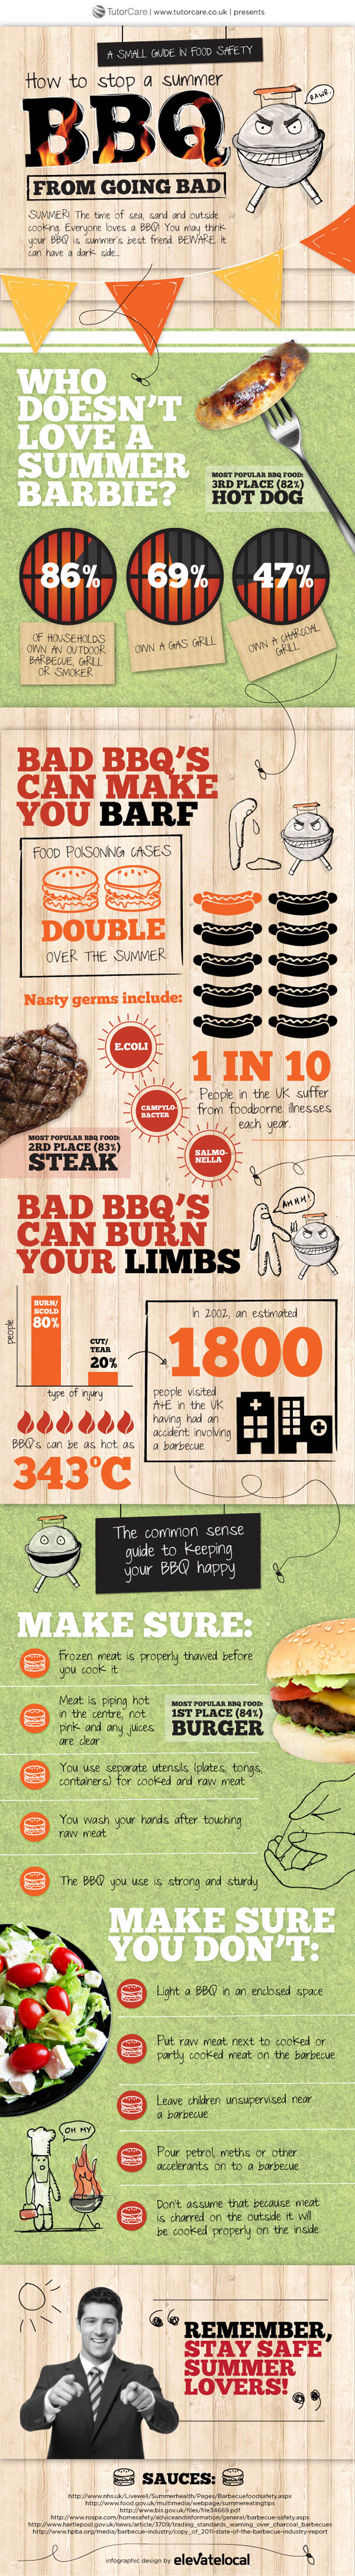 How To Stop a Summer BBQ From Going Bad